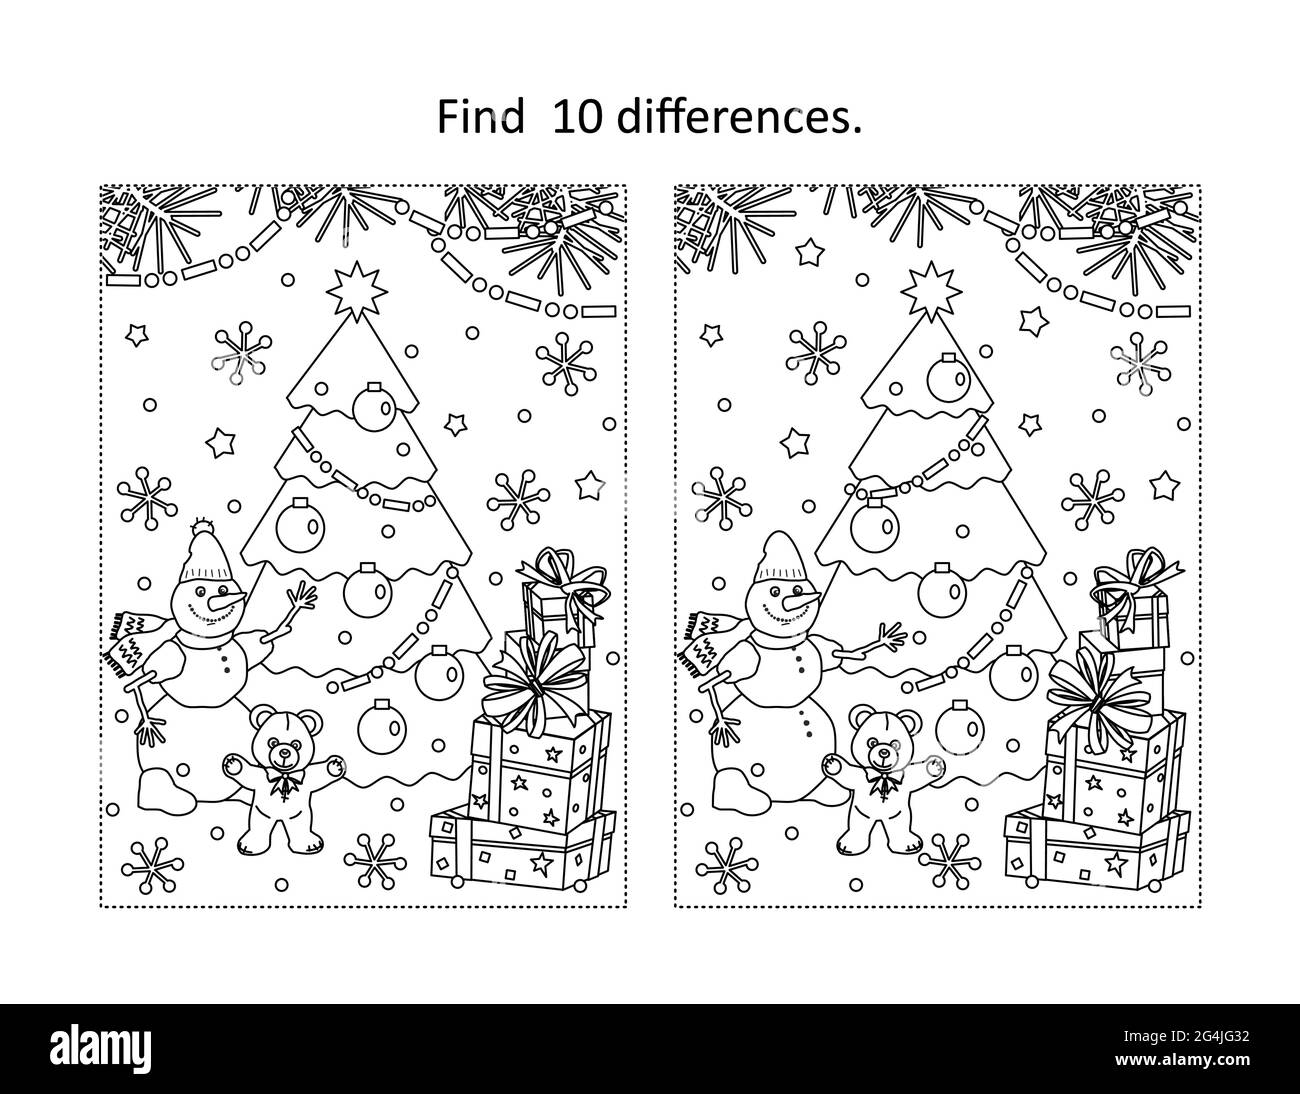 Spot the difference adult puzzle black and white stock photos images